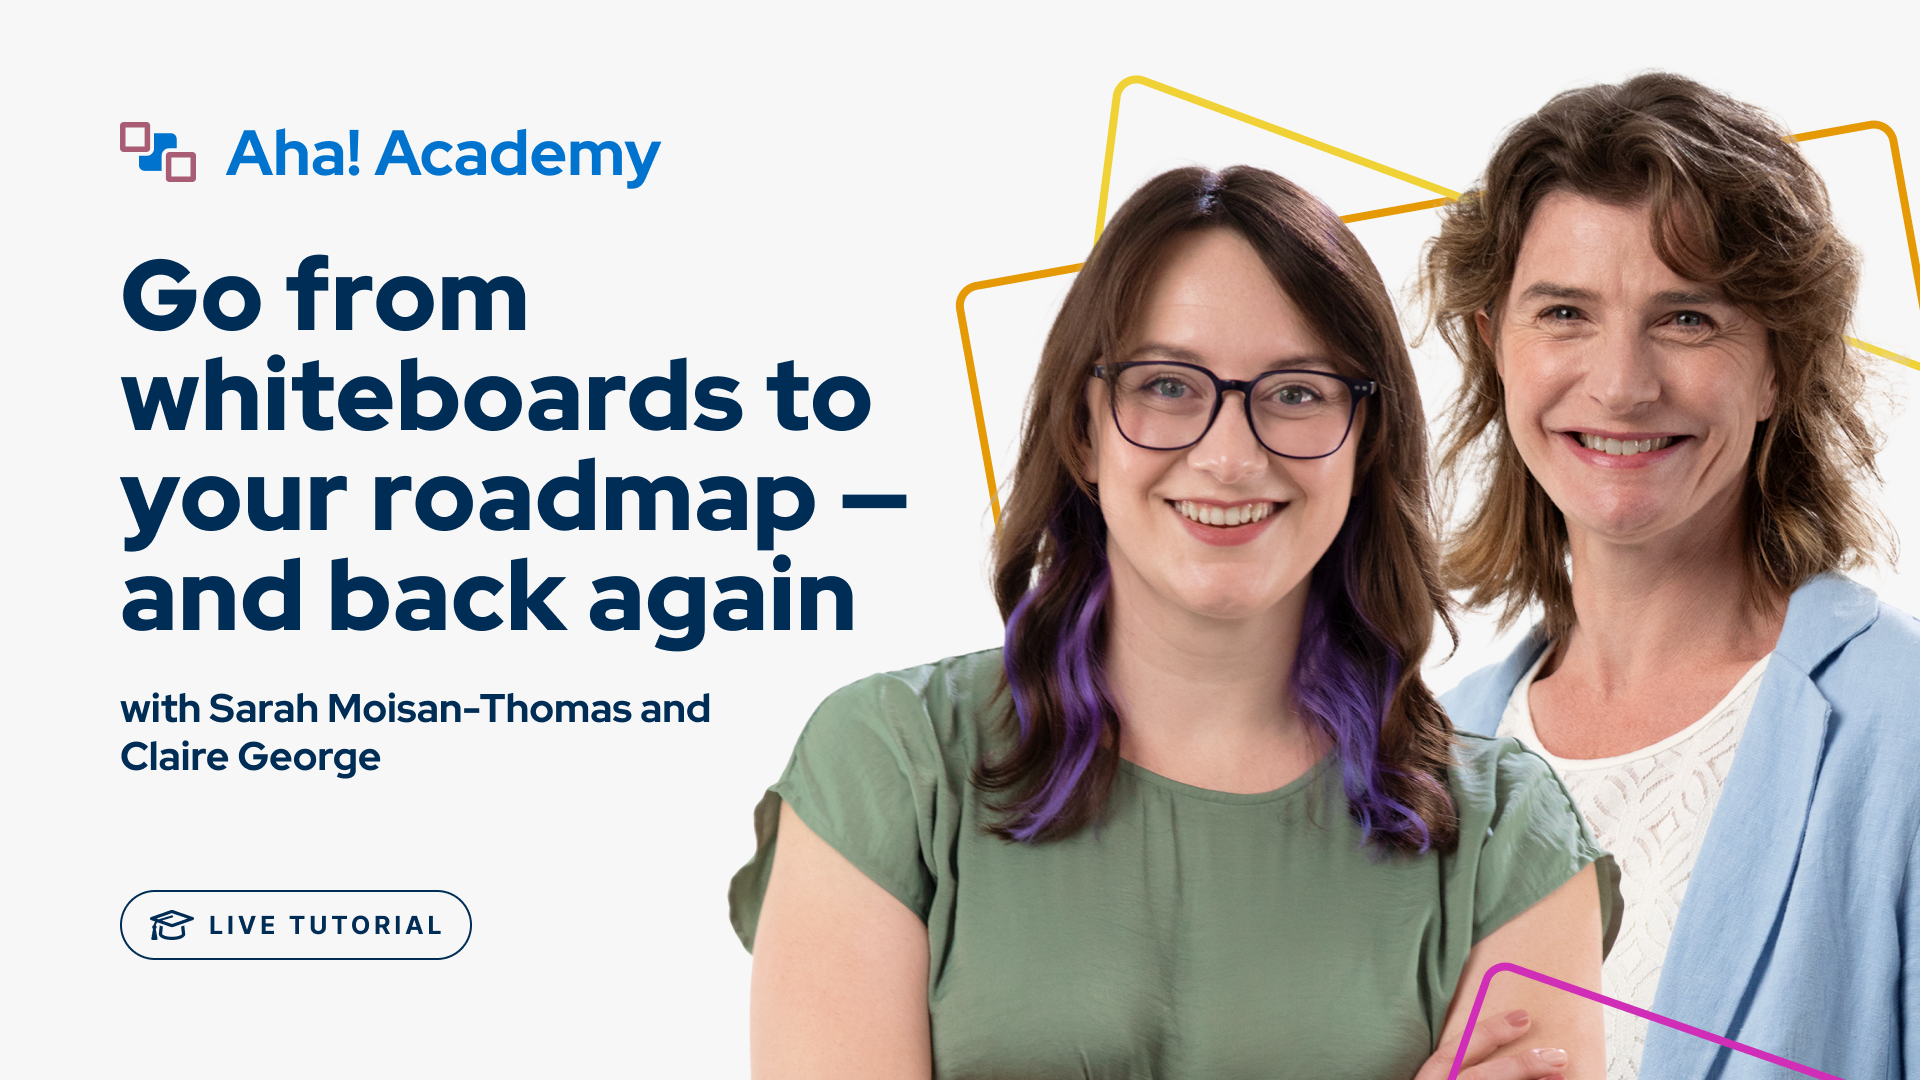 Aha! Academy live tutorial about bringing new product concepts to life with whiteboards with Aha! experts Sarah Moisan-Thomas and Claire George.